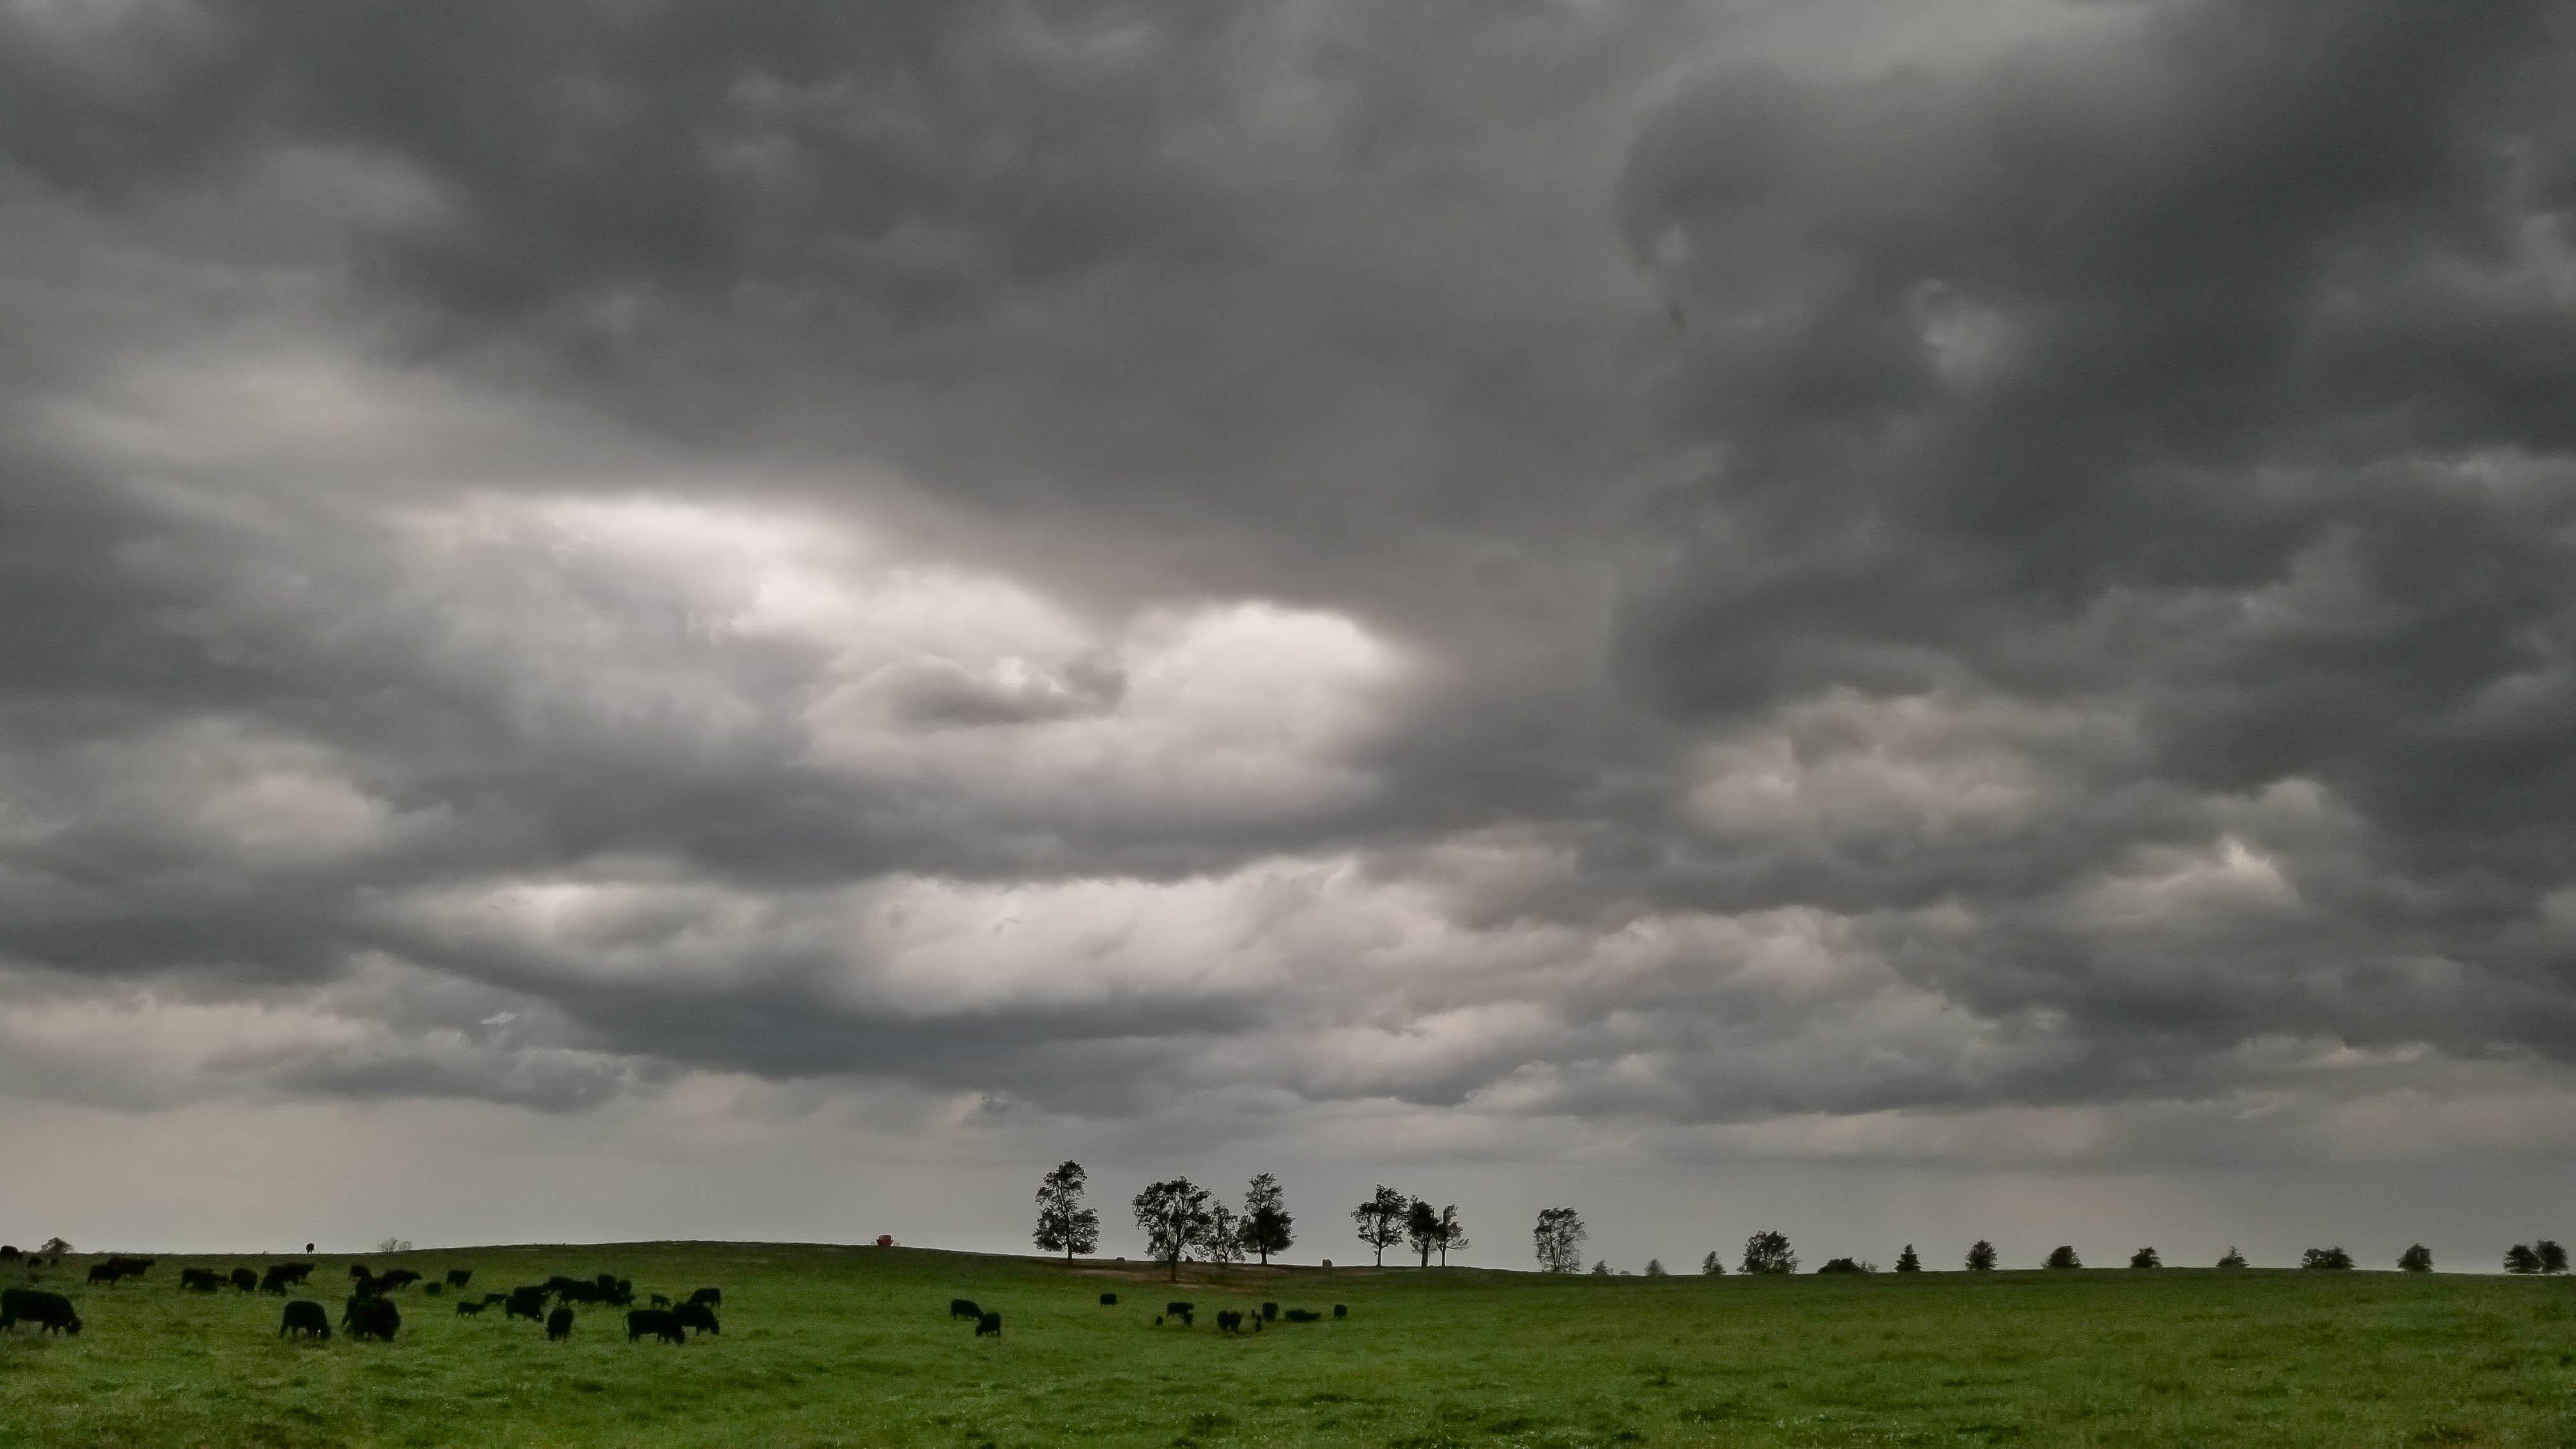 Cows in pasture with storm clouds